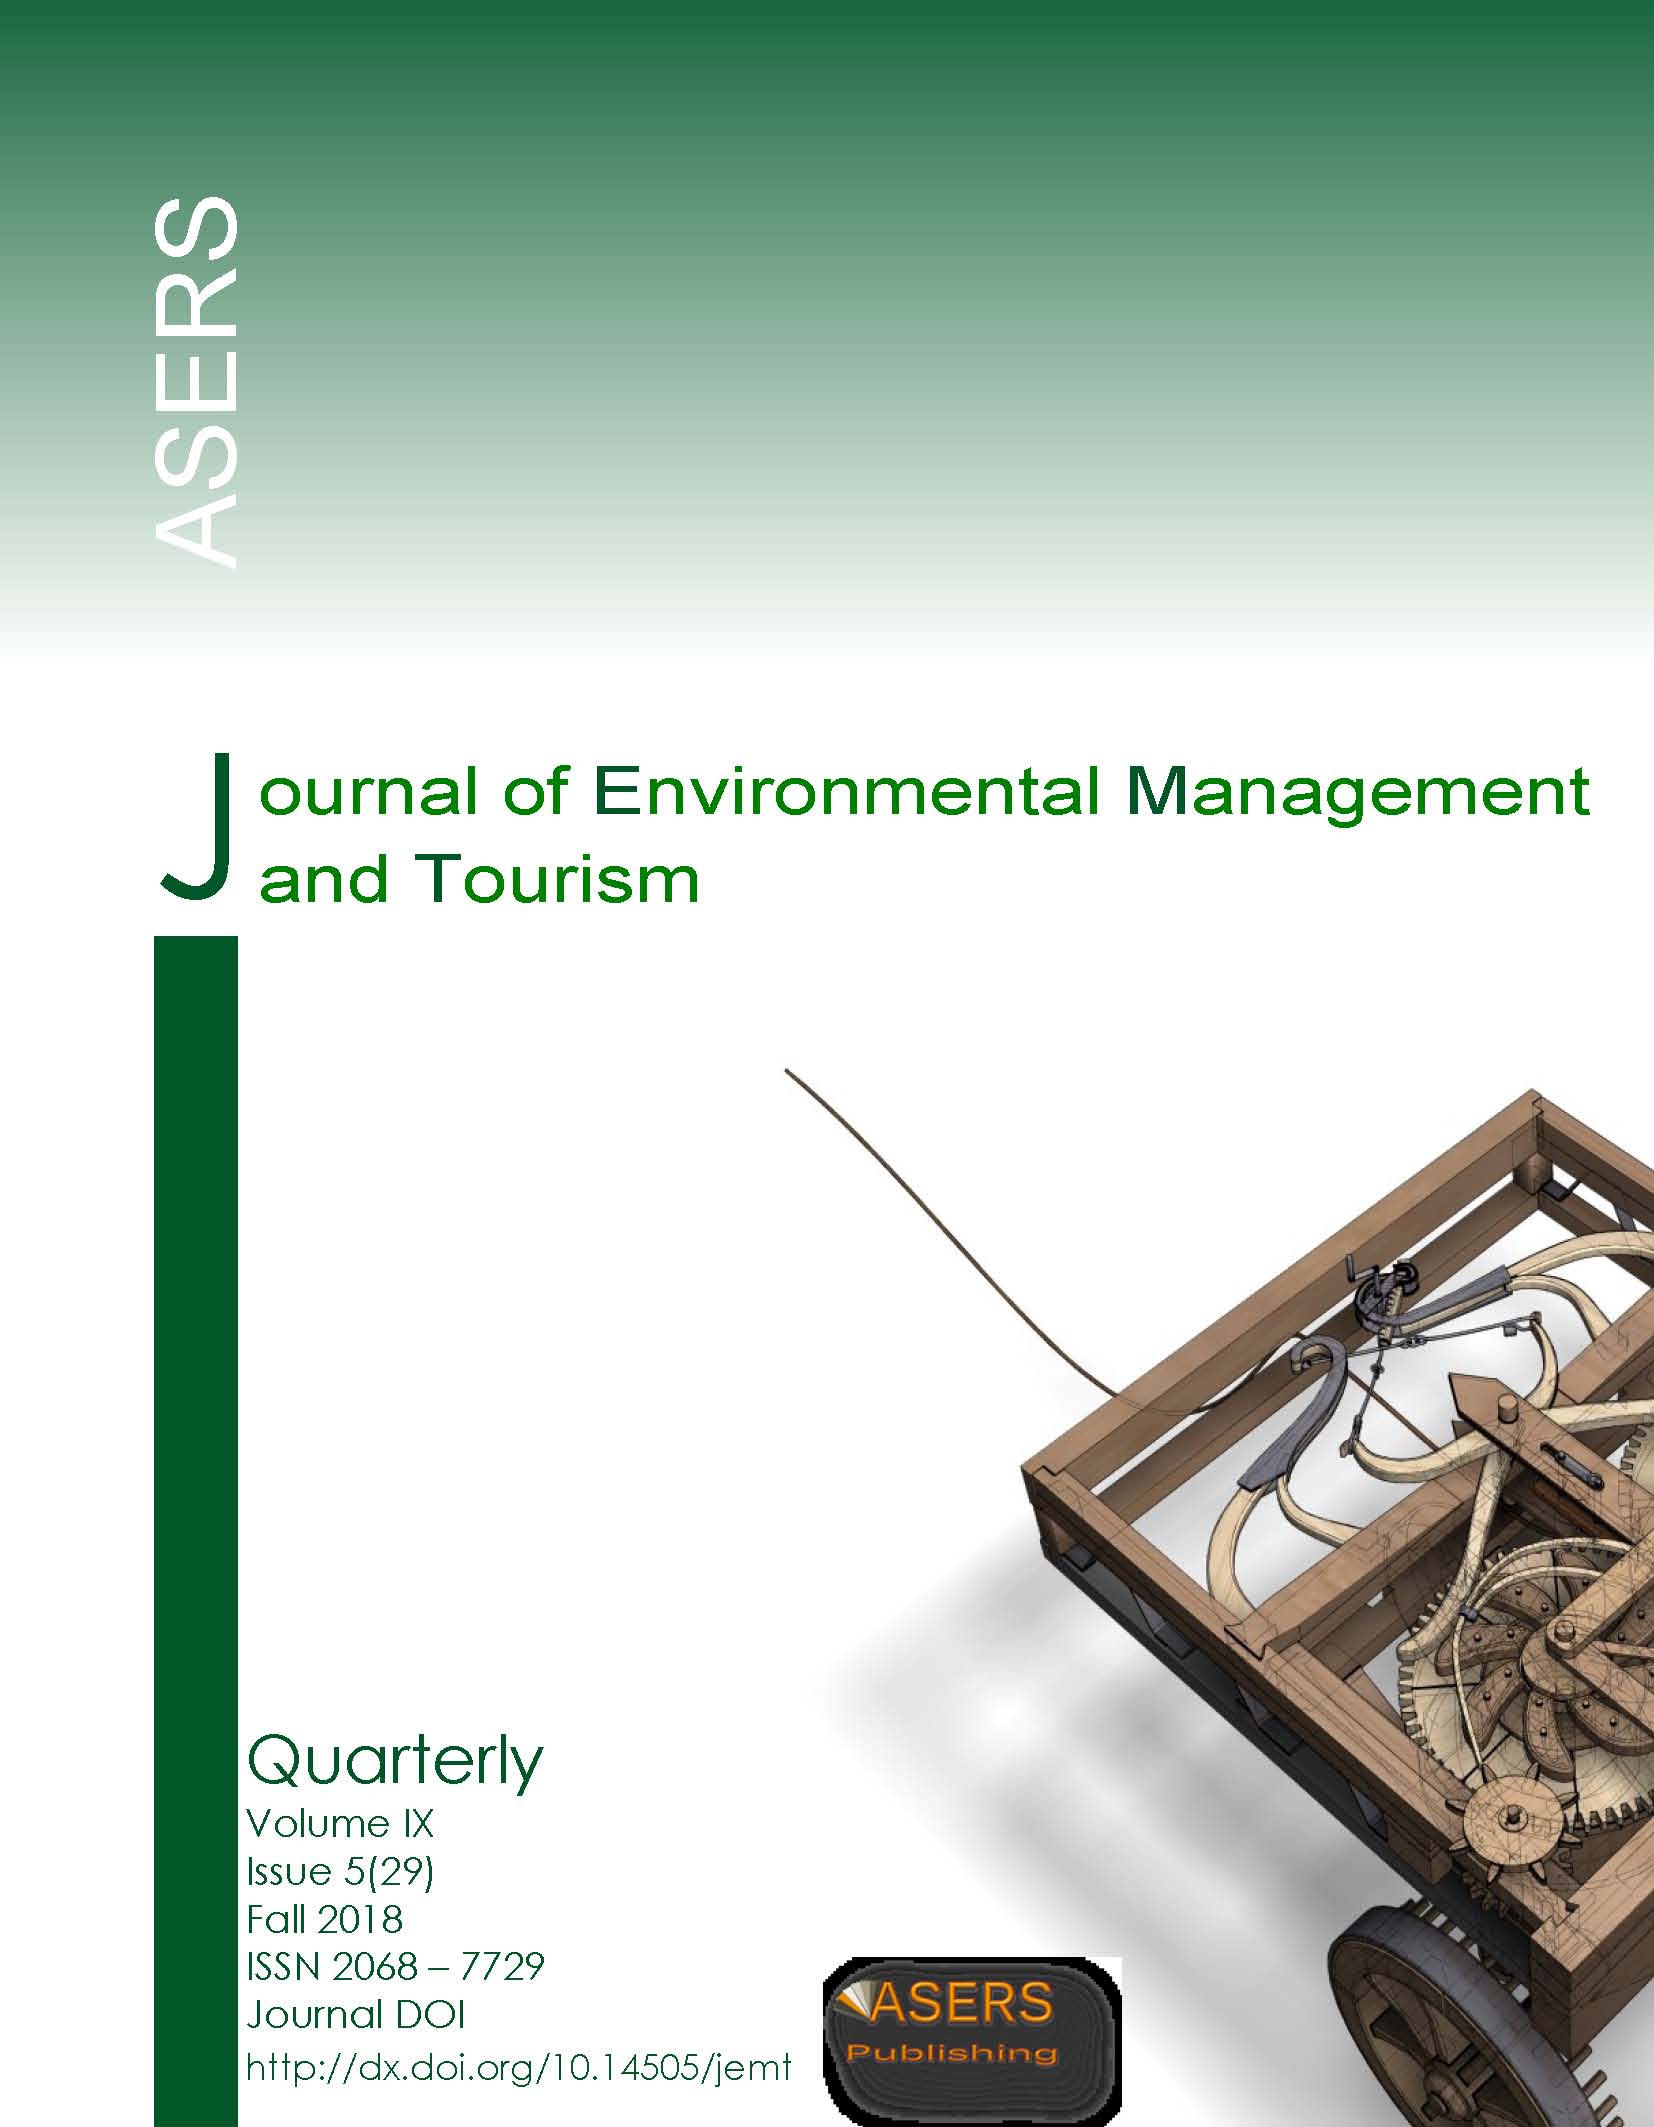 Approaches to the Formation of a Theoretical Model for the Analysis of Environmental and Economic Development Cover Image